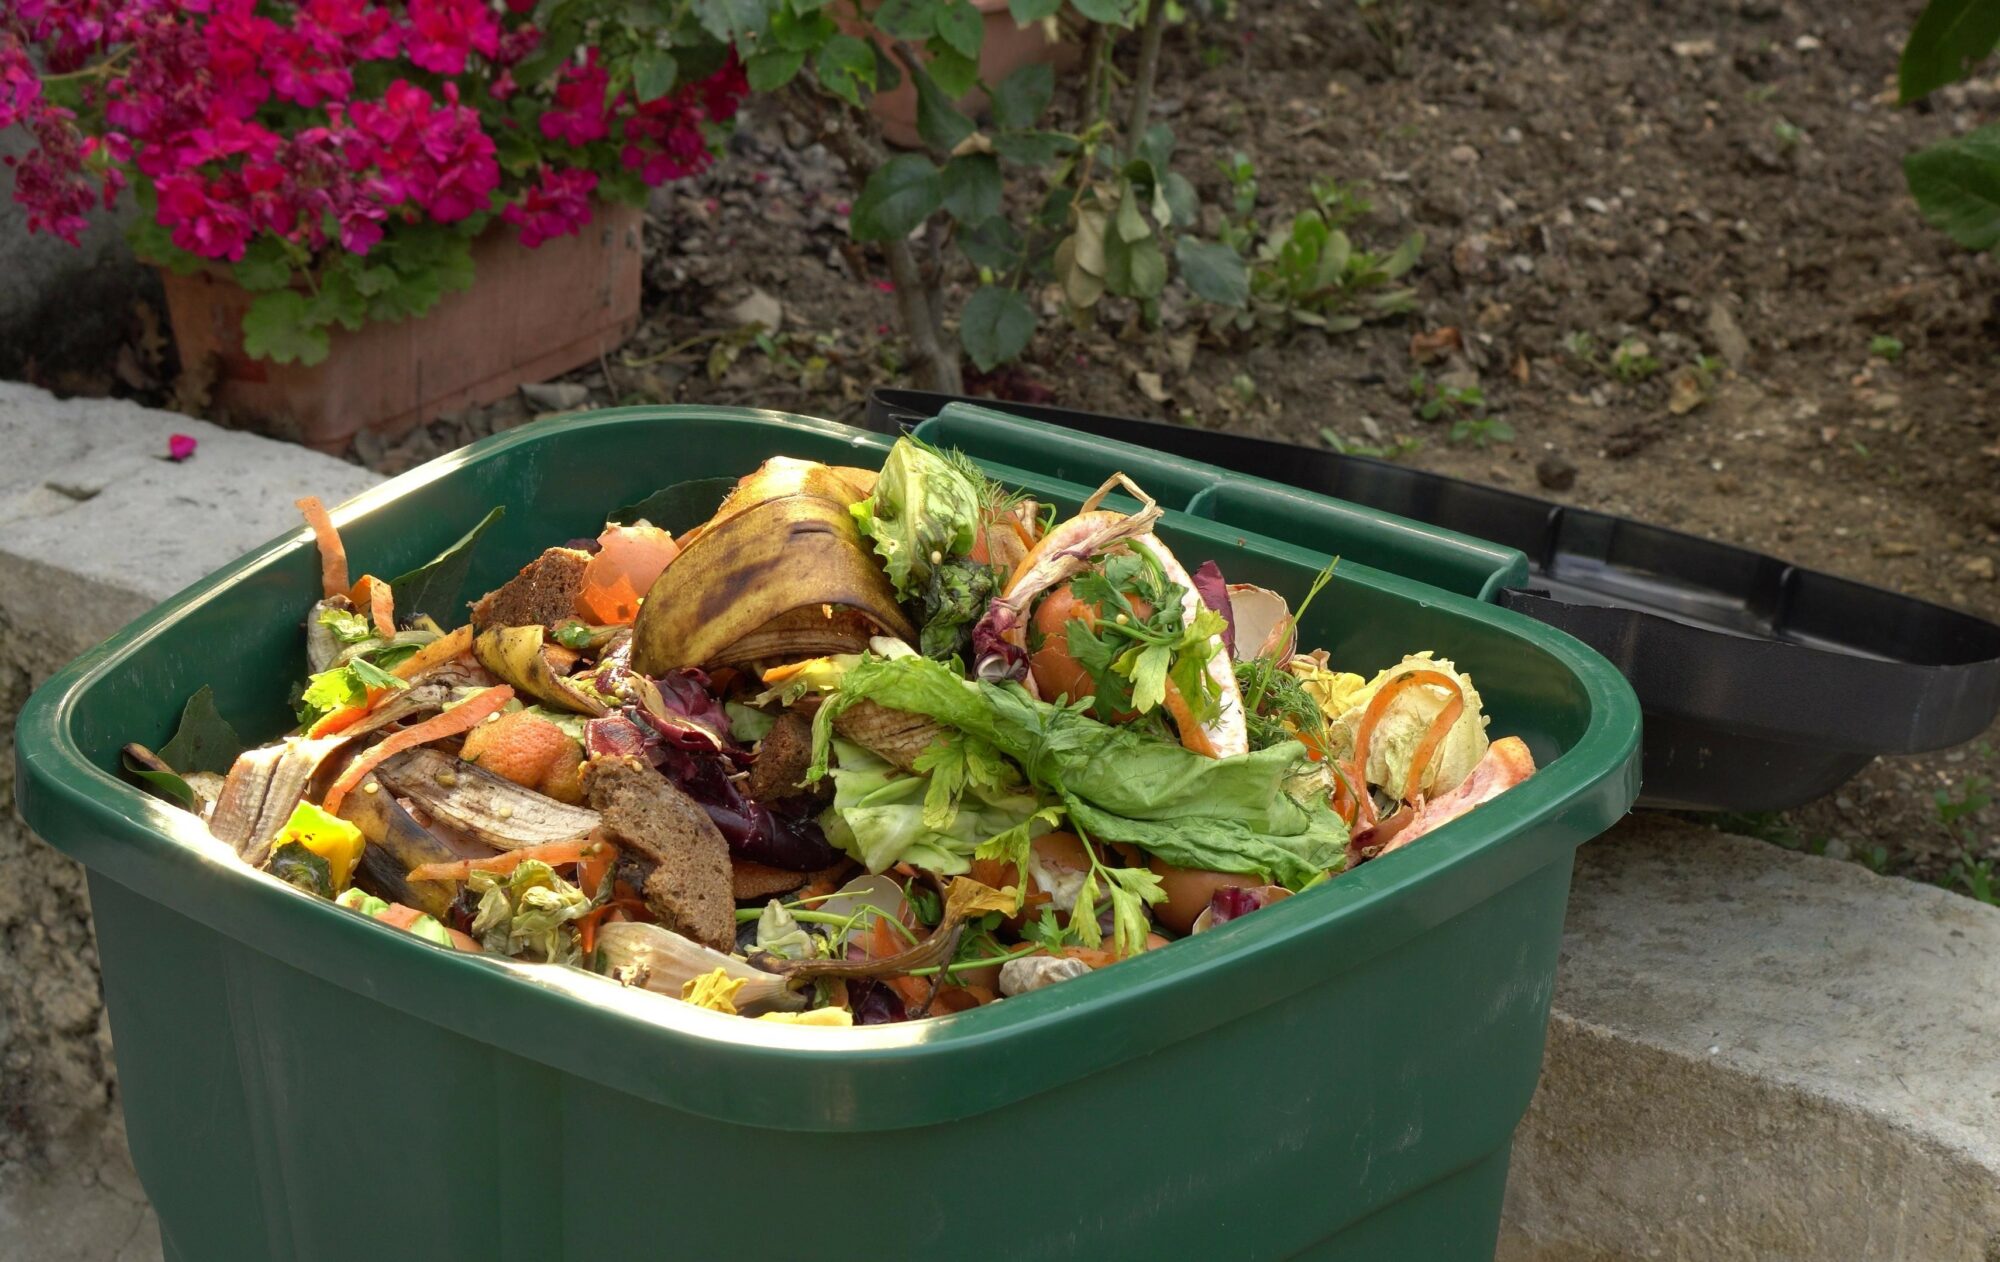 A bin filled with materials that comprise green waste, such as k